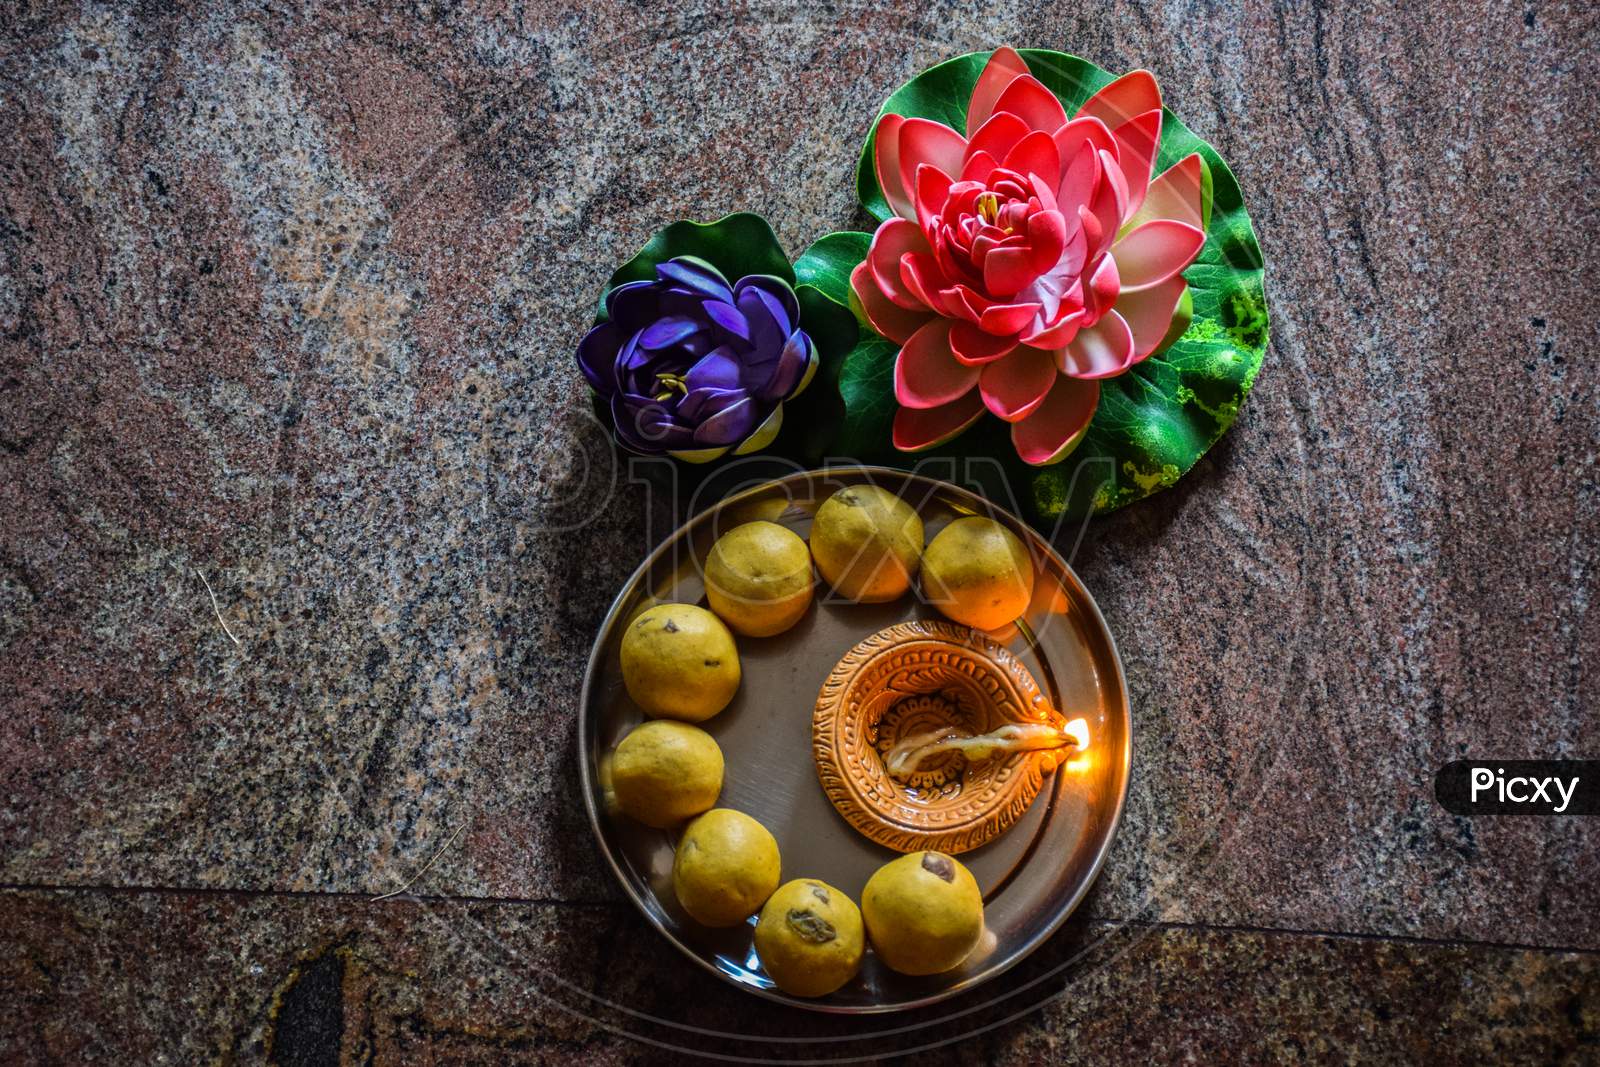 Delicious Gram Flours Sweet Dish ,Made Up During Diwali Festival In India. Decorated With Flowers And Oil Lamp.